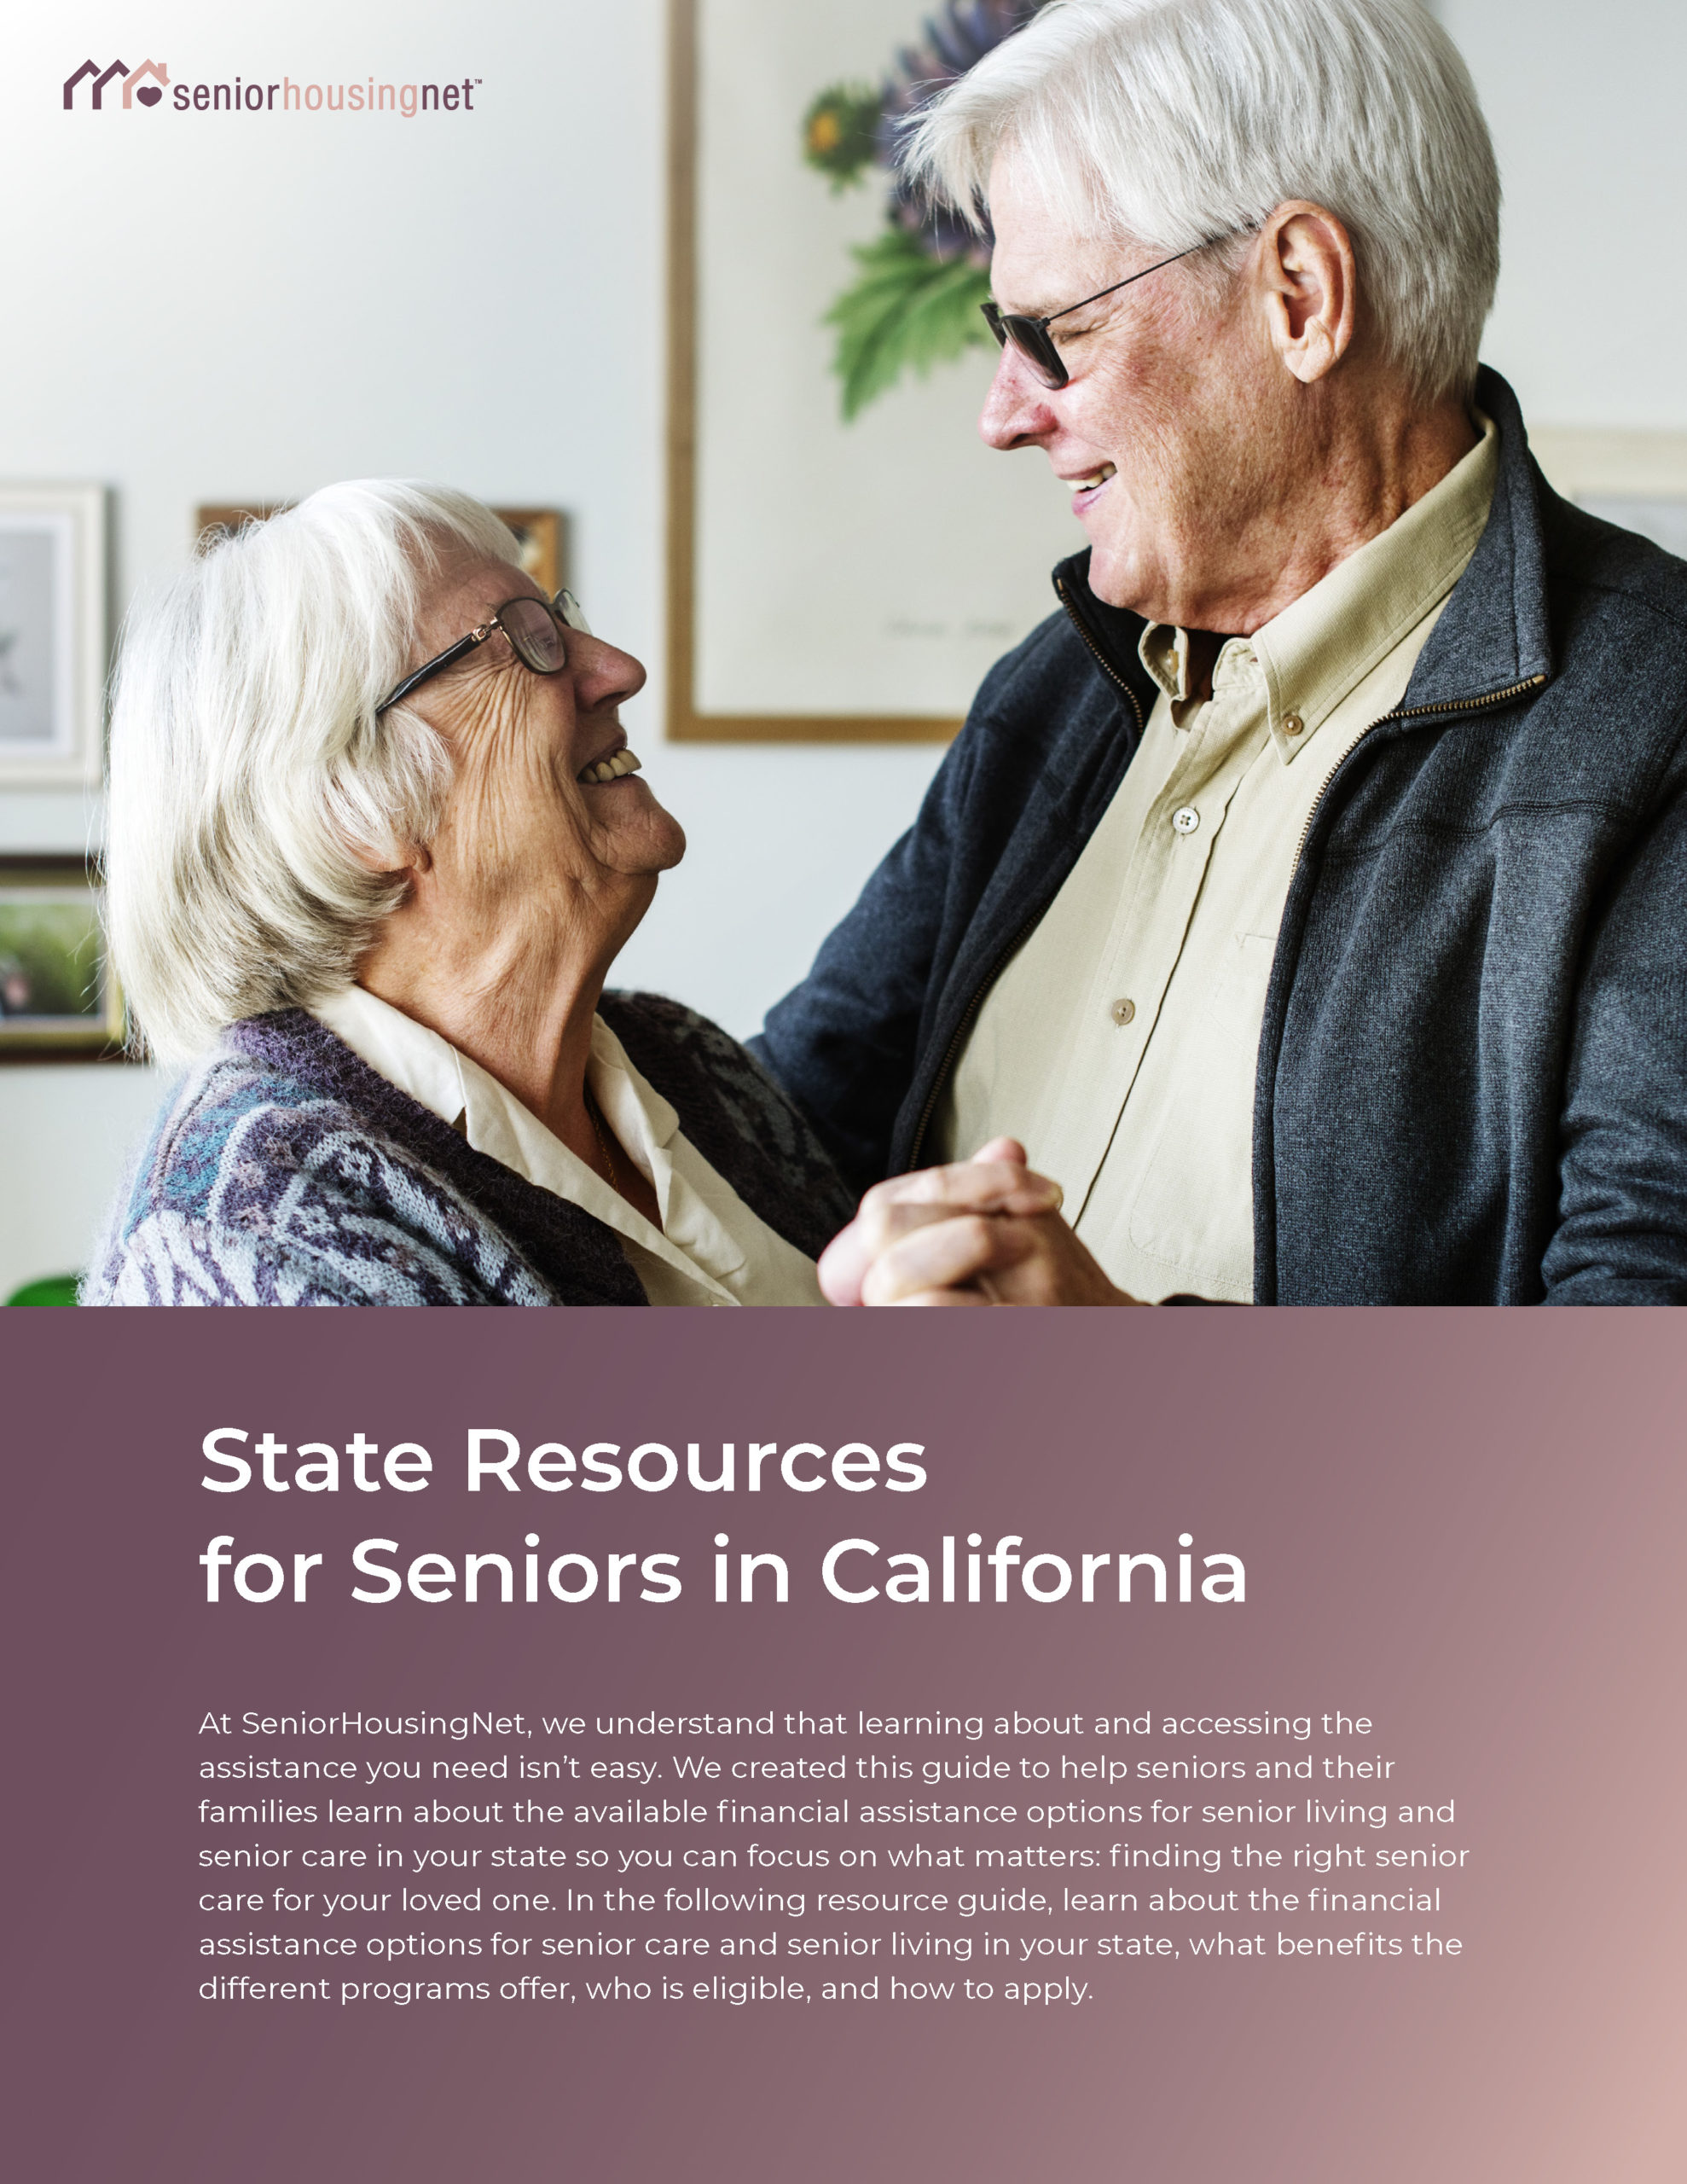 State Resources for Seniors in California